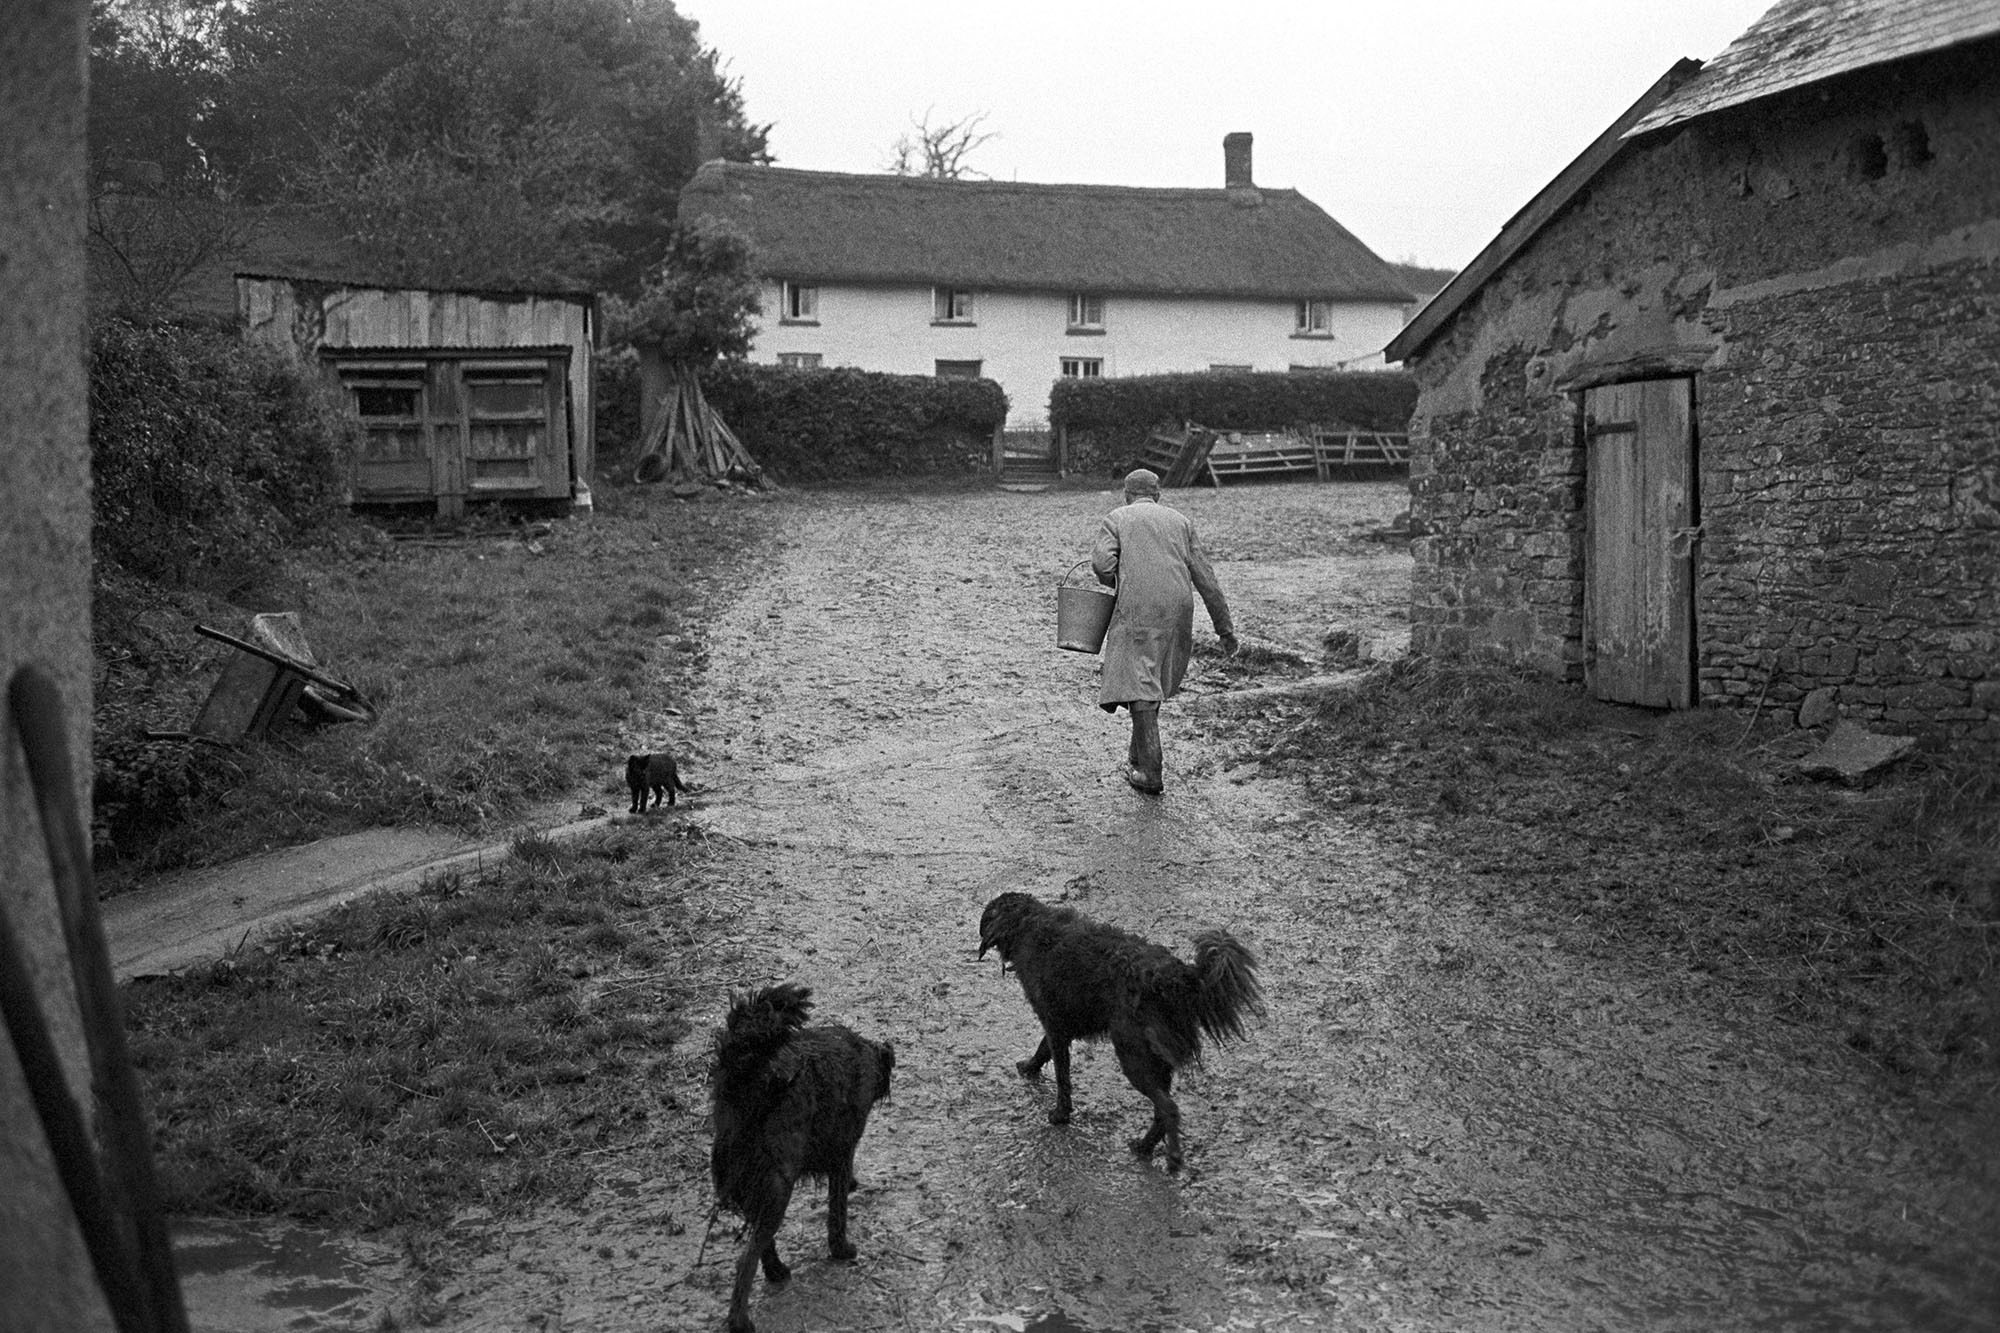 Farmyard with farmer and dogs. Thatched farm in background.
[Harry Webber carrying a bucket through the farmyard at White Cleave Farm in Burrington with two black dogs and a black cat following him. The thatched farmhouse and outbuildings can be seen in the background.]